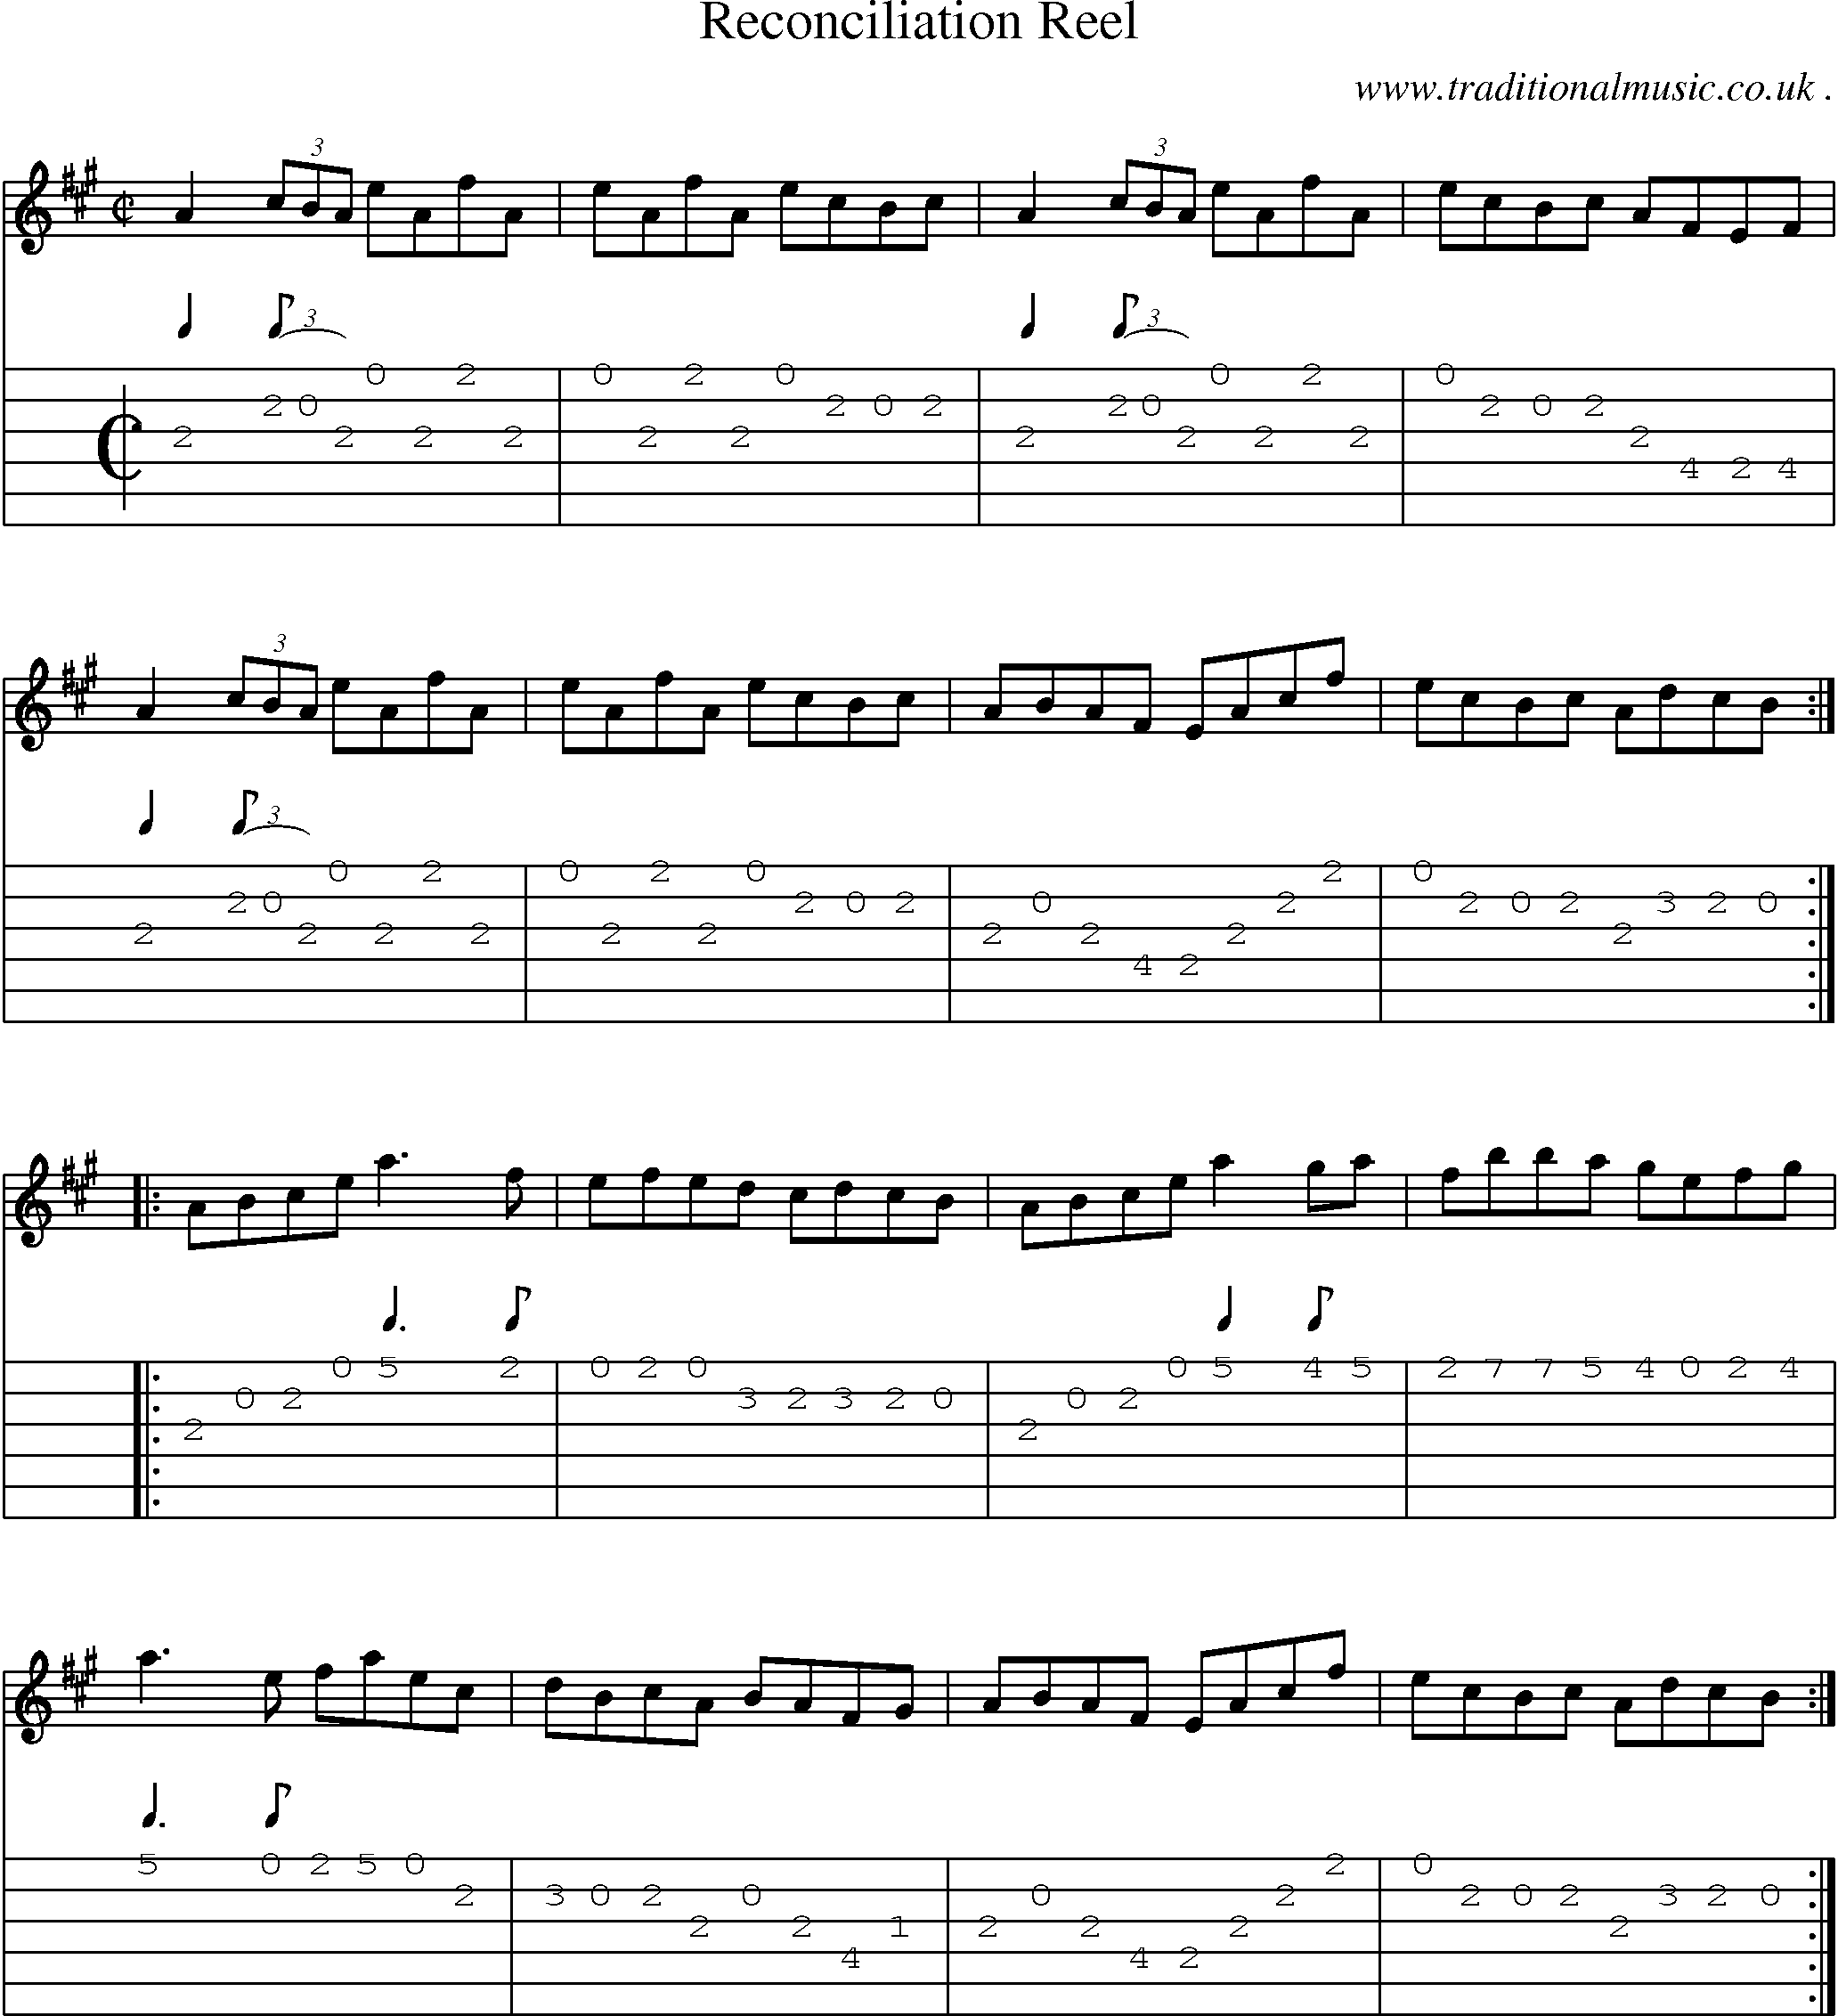 Sheet-Music and Guitar Tabs for Reconciliation Reel